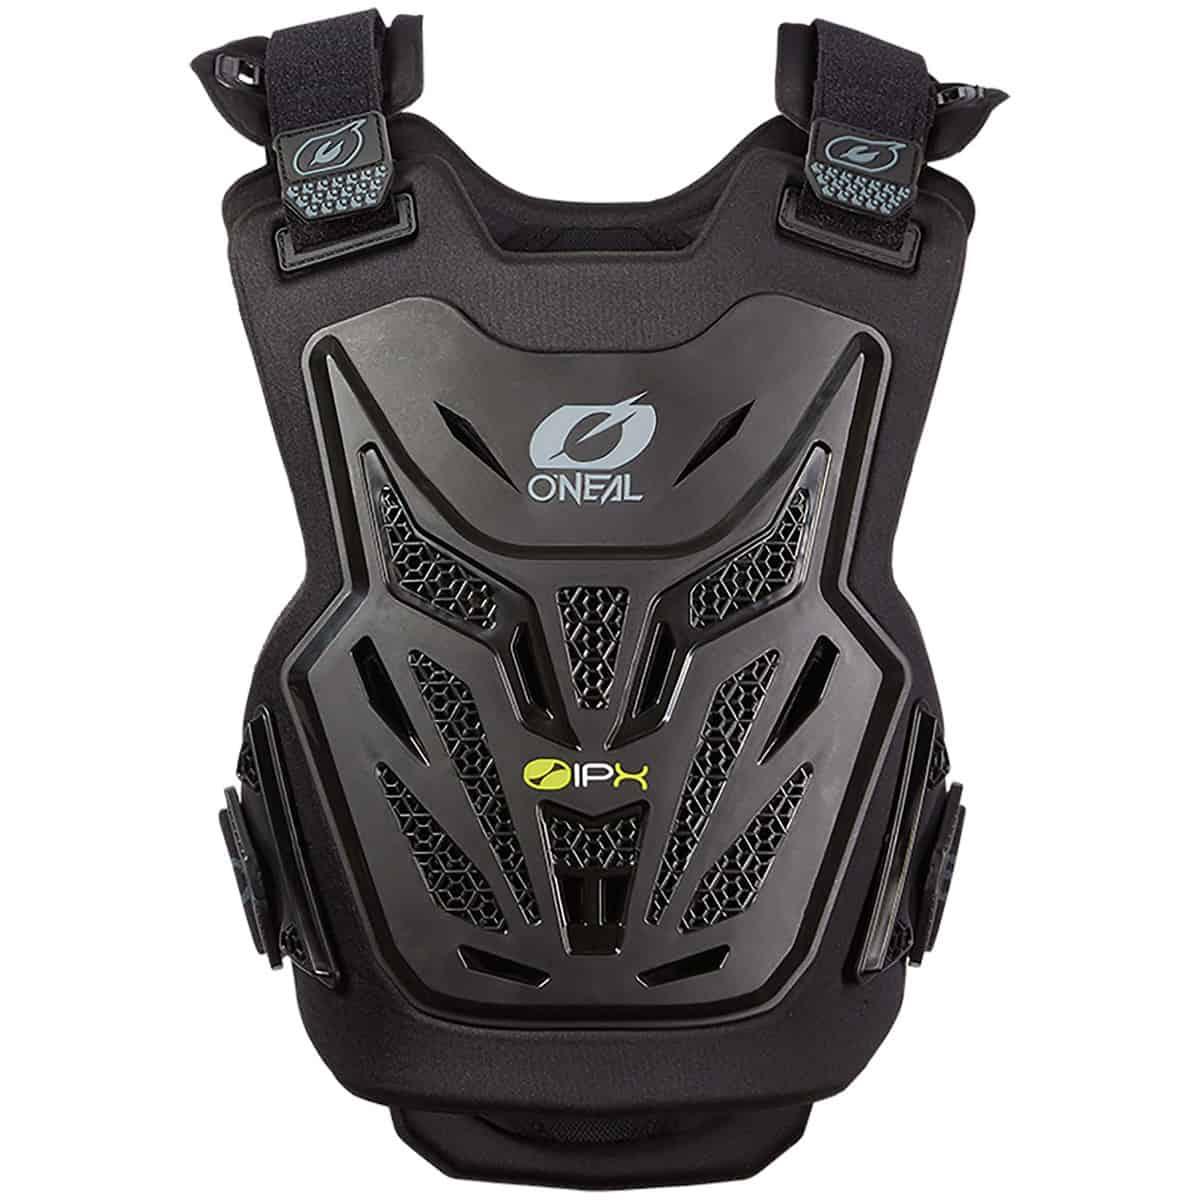 This Split Lite chest protector from ONeal provides both impact protection and a barrier between you and loose stones-1